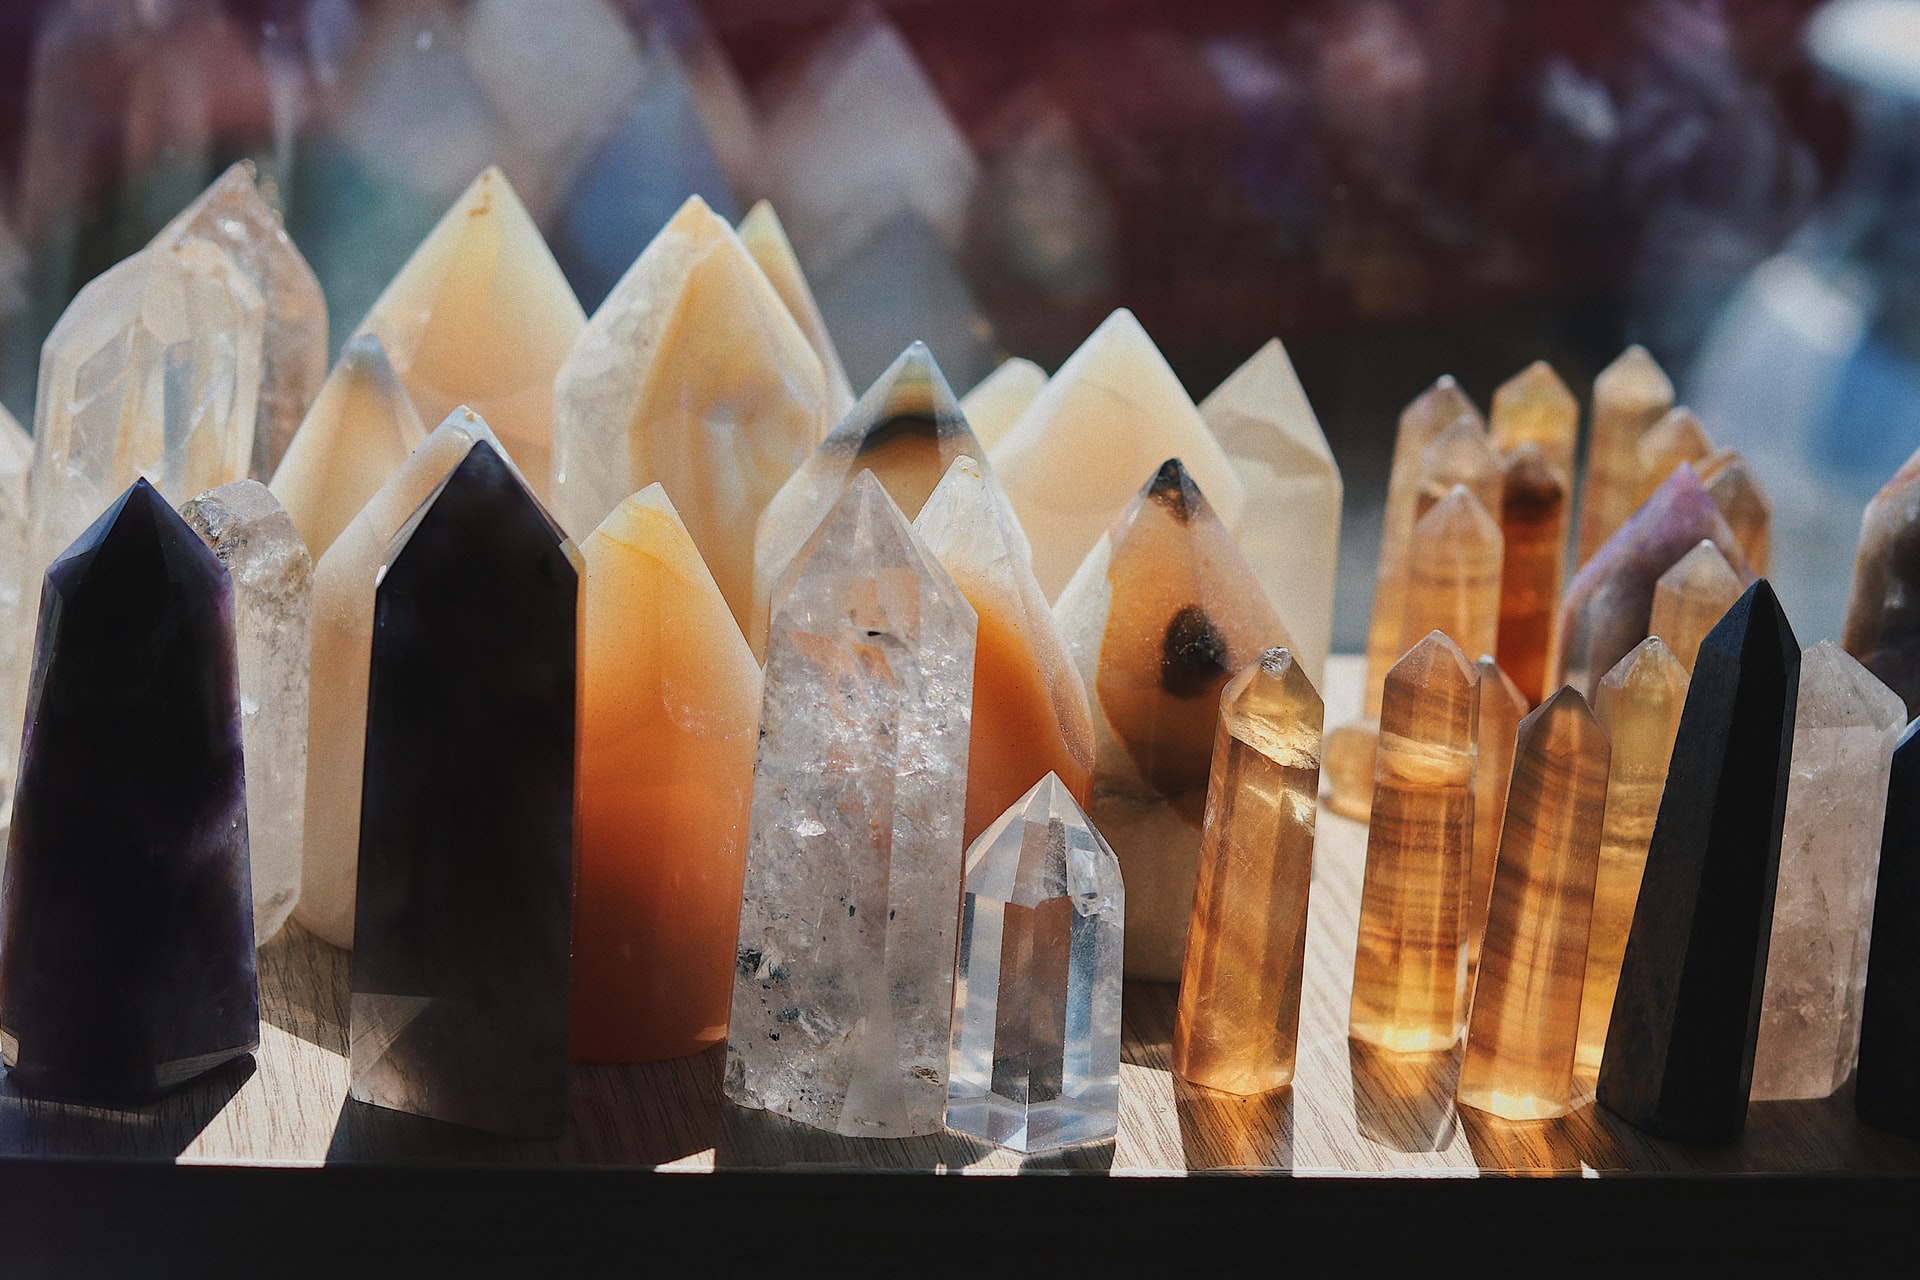 Top 10 Crystals & Stones That Are Good For Depression